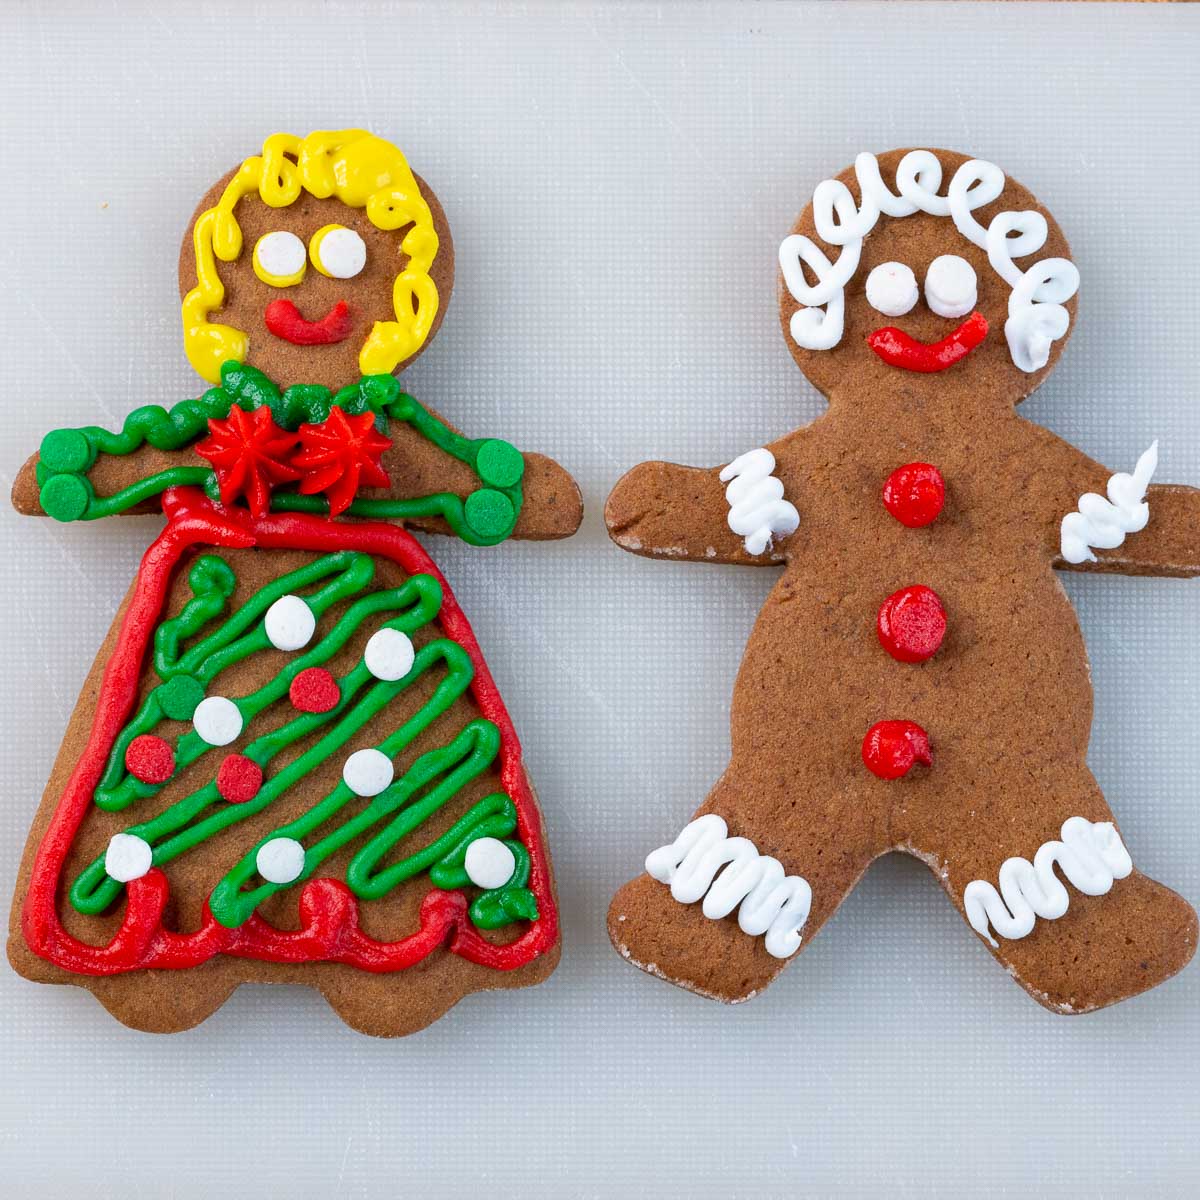 Decorated gingerbread man and gingerbread women on a white cutting board.